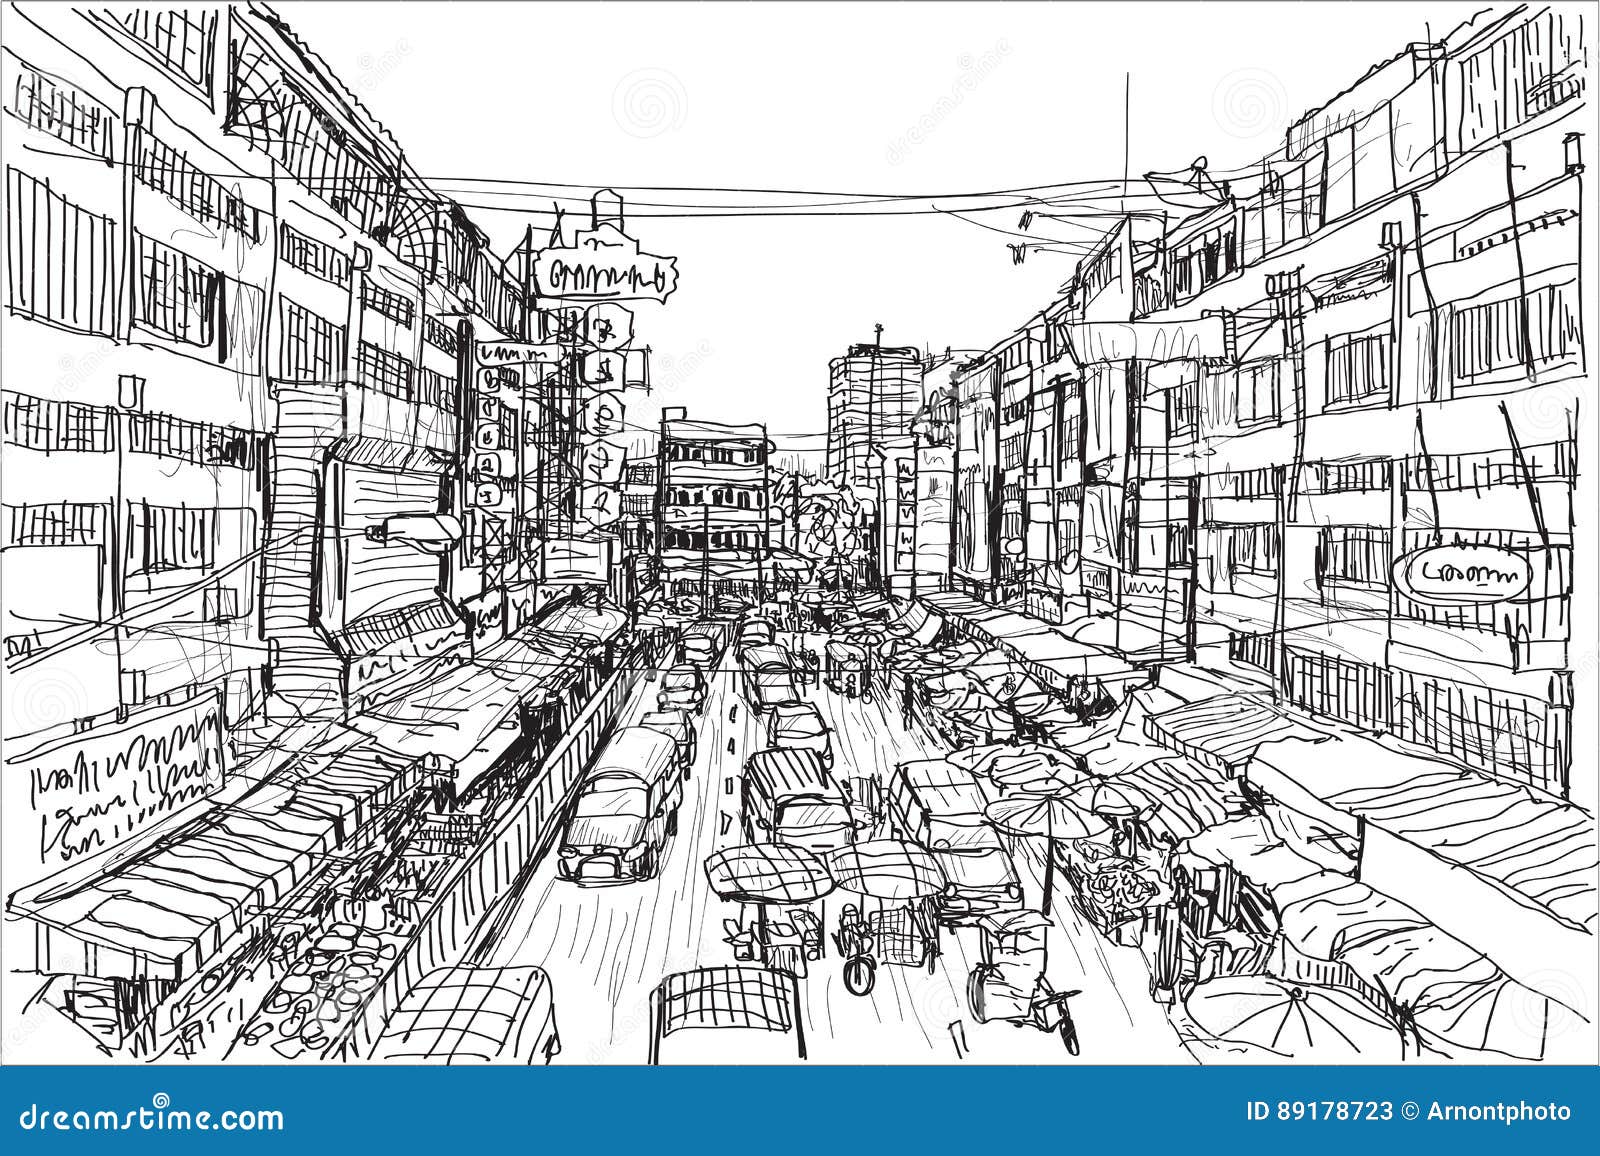 Sketch Drawing Cartoon Old Town On Stock Vector Royalty Free 1240092319   Shutterstock